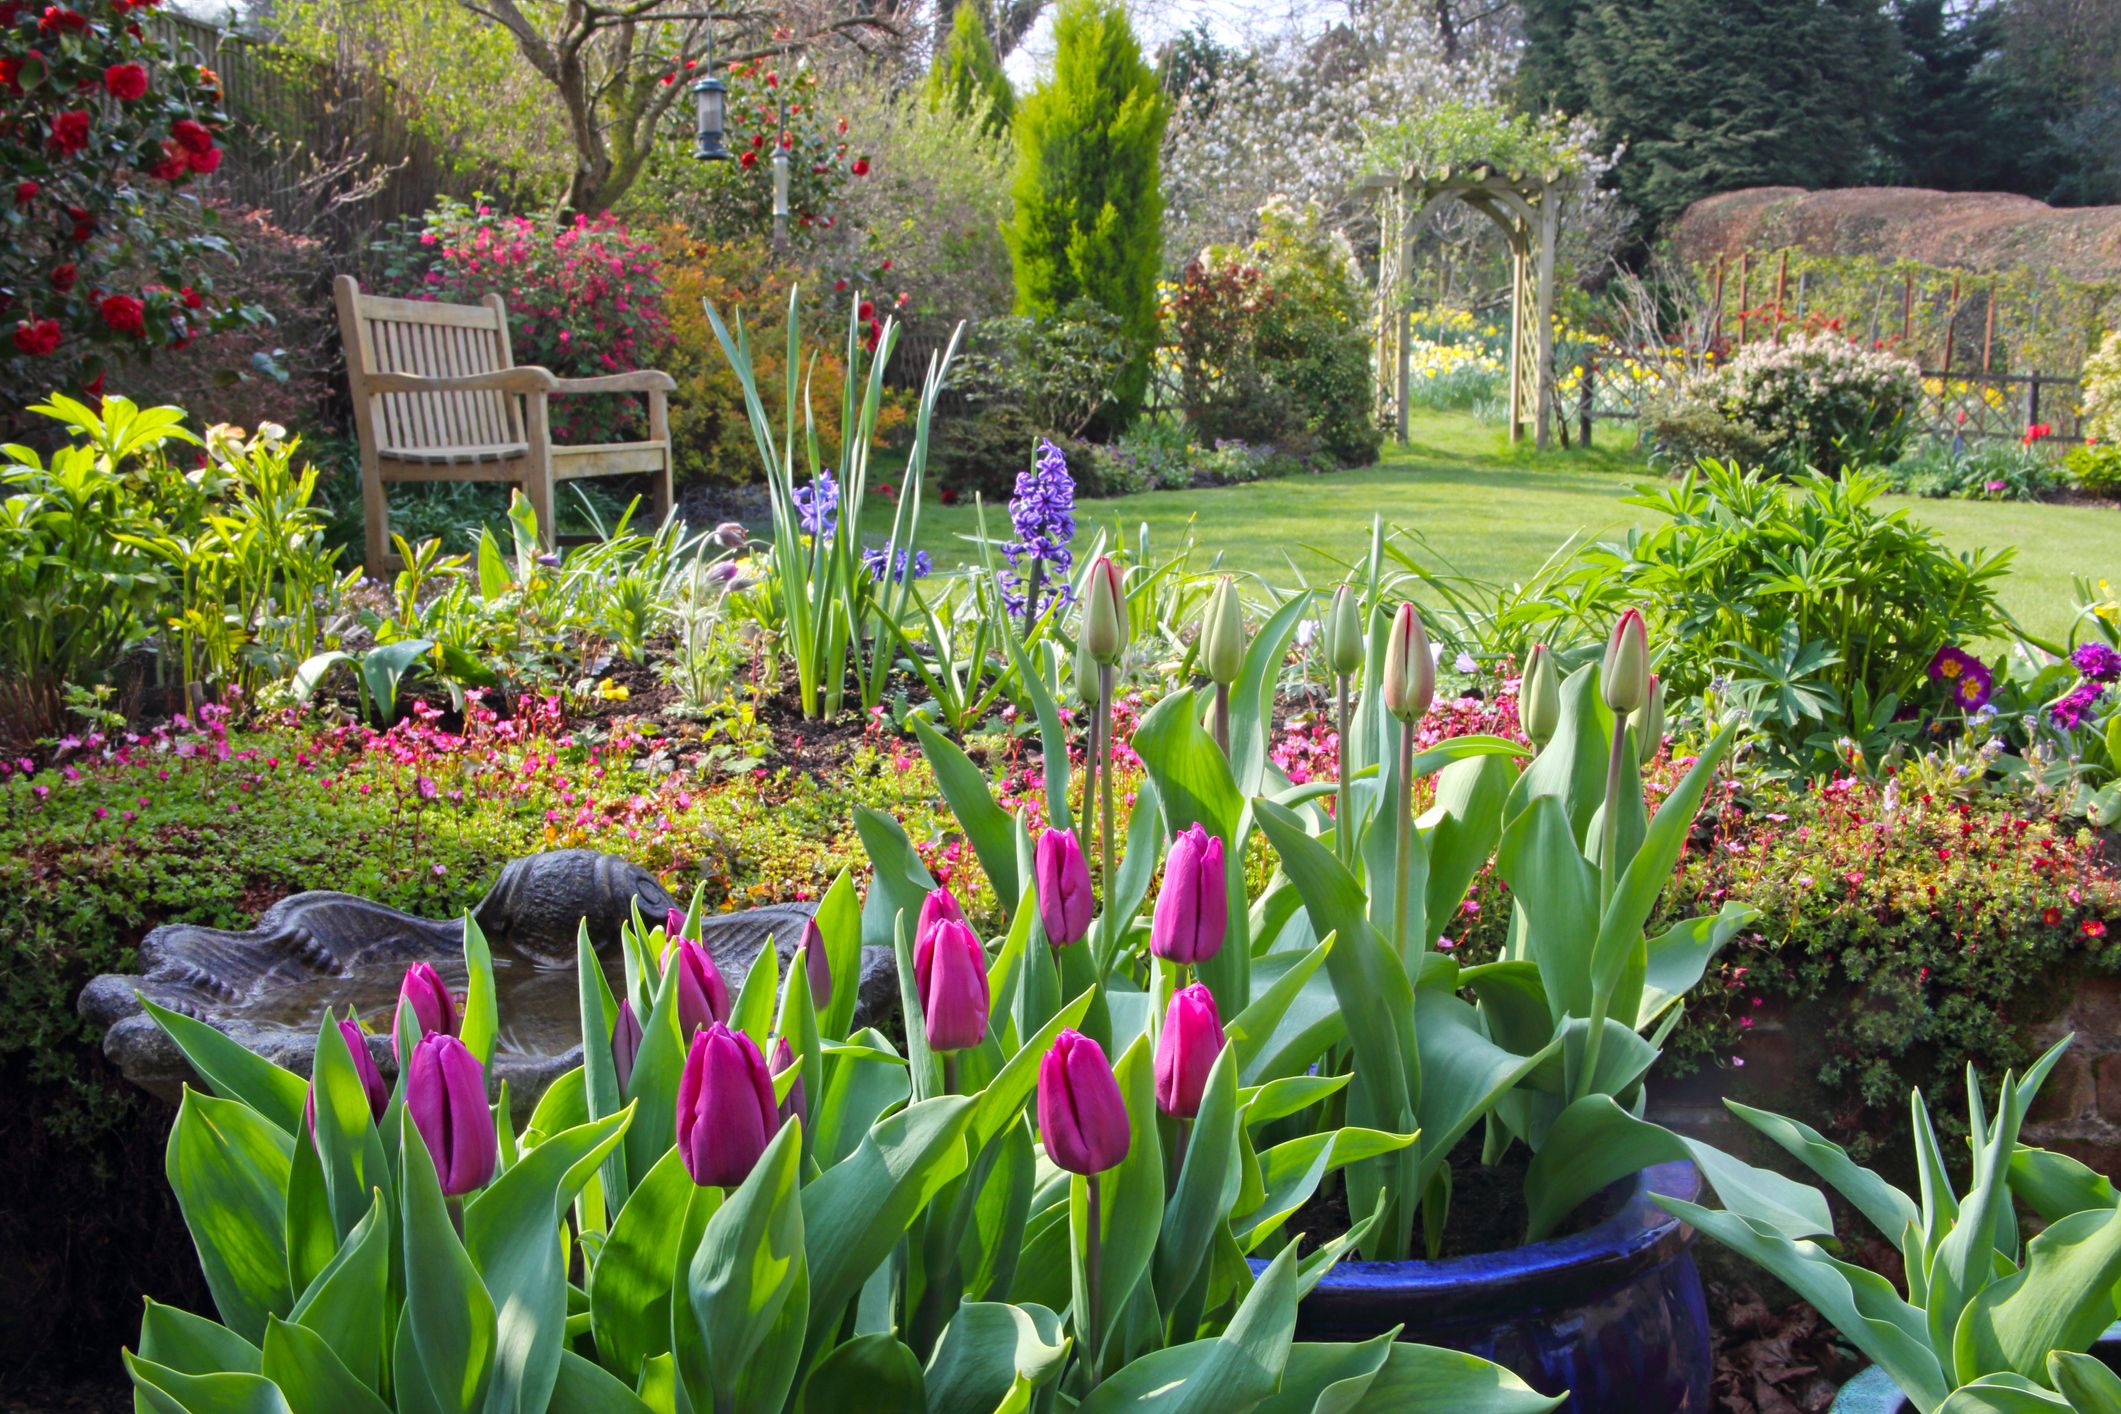 How to prepare your garden for spring, according to Adam Frost